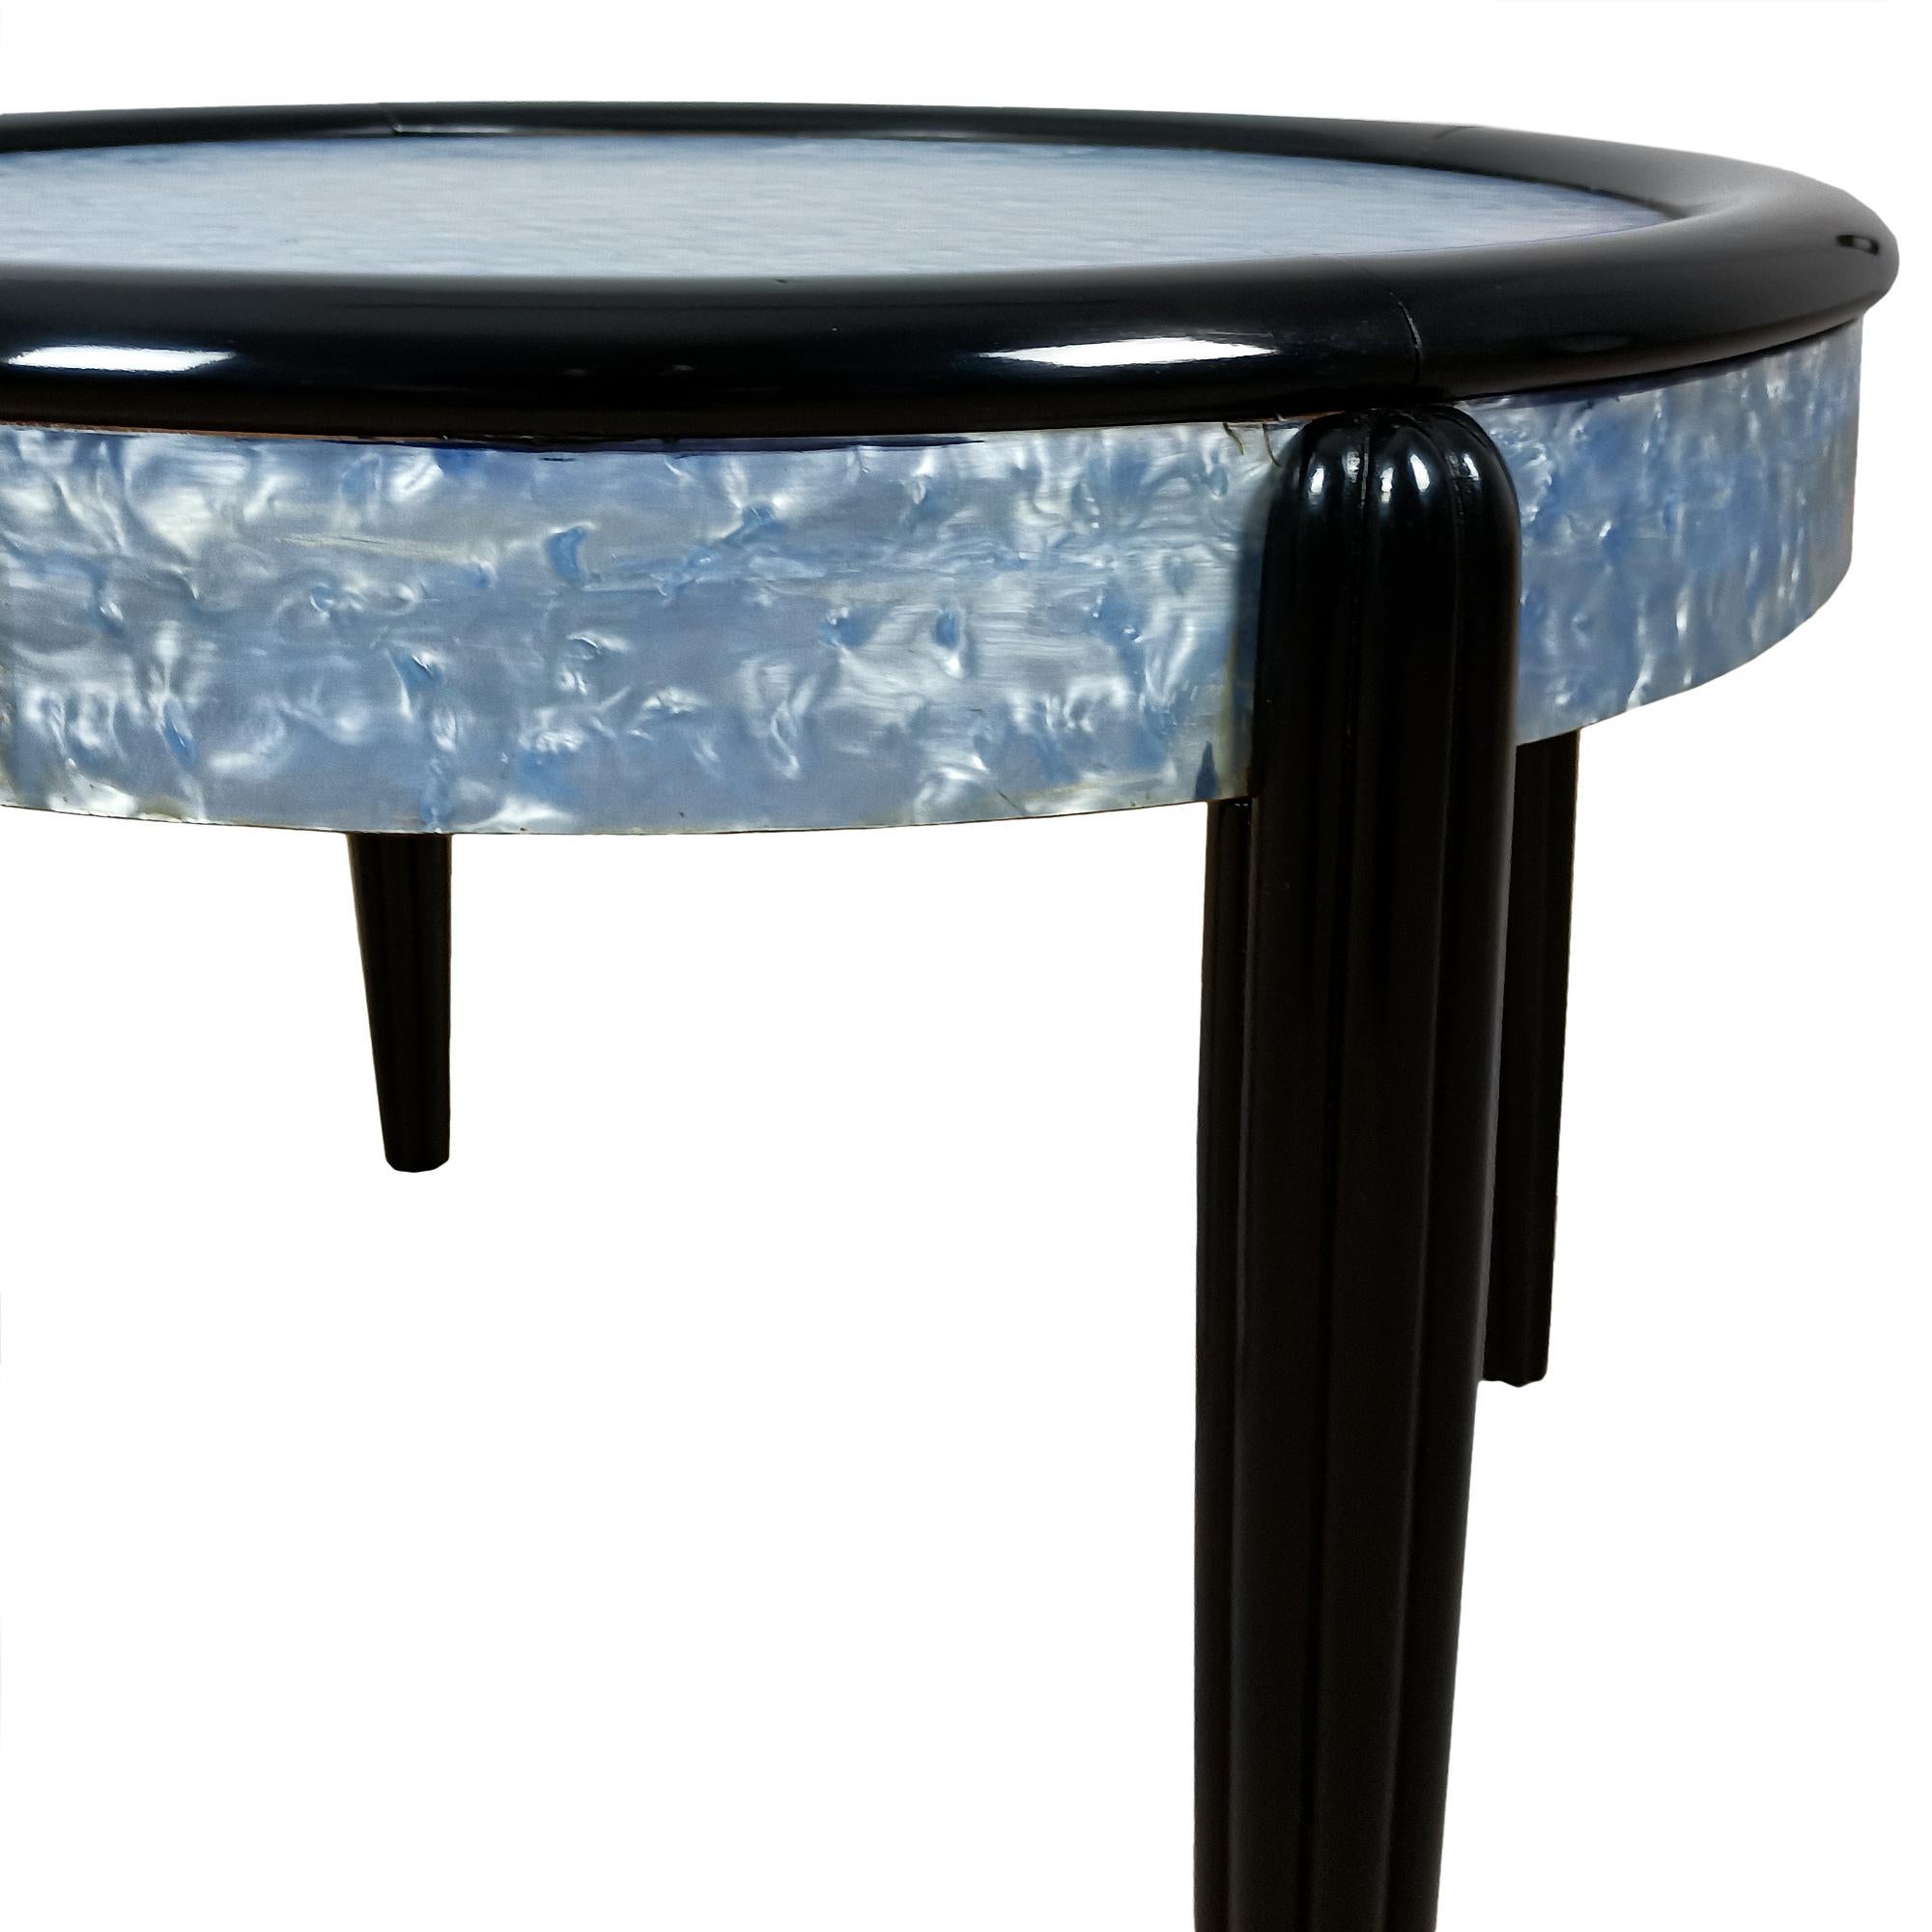 Beech Art Deco Side Table In Celluloid – France 1925 For Sale